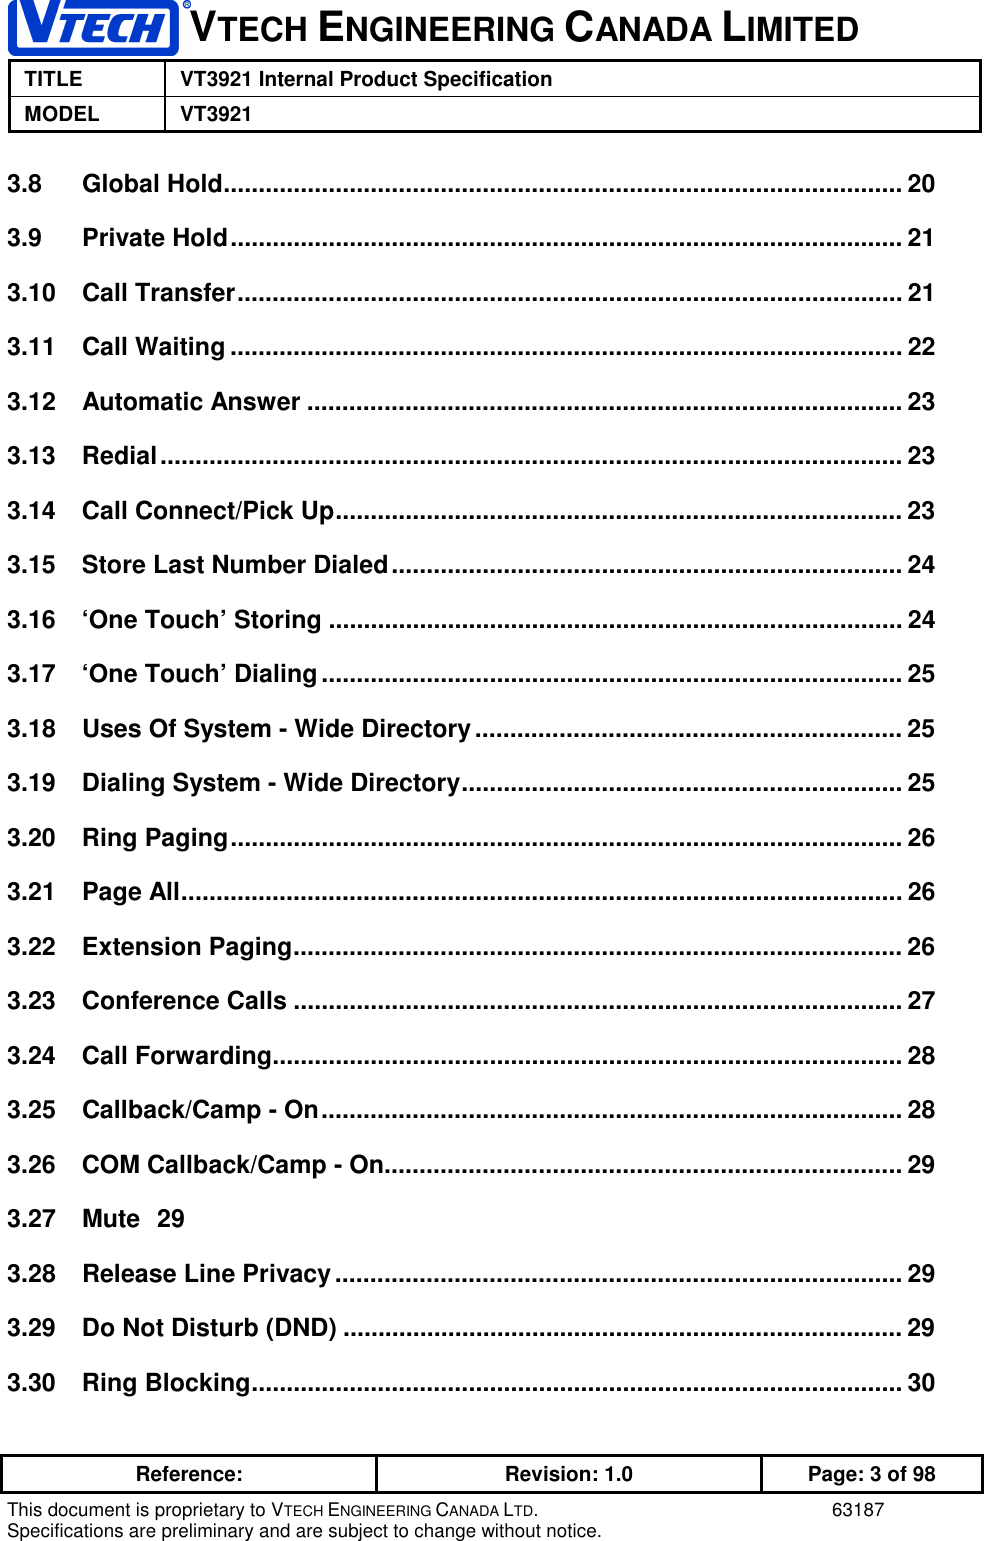 VTECH ENGINEERING CANADA LIMITEDTITLE VT3921 Internal Product SpecificationMODEL VT3921Reference: Revision: 1.0 Page: 3 of 98This document is proprietary to VTECH ENGINEERING CANADA LTD. 63187Specifications are preliminary and are subject to change without notice.3.8 Global Hold................................................................................................. 203.9 Private Hold................................................................................................ 213.10 Call Transfer............................................................................................... 213.11 Call Waiting ................................................................................................ 223.12 Automatic Answer ..................................................................................... 233.13 Redial.......................................................................................................... 233.14 Call Connect/Pick Up................................................................................. 233.15 Store Last Number Dialed......................................................................... 243.16 ‘One Touch’ Storing .................................................................................. 243.17 ‘One Touch’ Dialing................................................................................... 253.18 Uses Of System - Wide Directory............................................................. 253.19 Dialing System - Wide Directory............................................................... 253.20 Ring Paging................................................................................................ 263.21 Page All....................................................................................................... 263.22 Extension Paging....................................................................................... 263.23 Conference Calls ....................................................................................... 273.24 Call Forwarding.......................................................................................... 283.25 Callback/Camp - On................................................................................... 283.26 COM Callback/Camp - On.......................................................................... 293.27 Mute 293.28 Release Line Privacy................................................................................. 293.29 Do Not Disturb (DND) ................................................................................ 293.30 Ring Blocking............................................................................................. 30